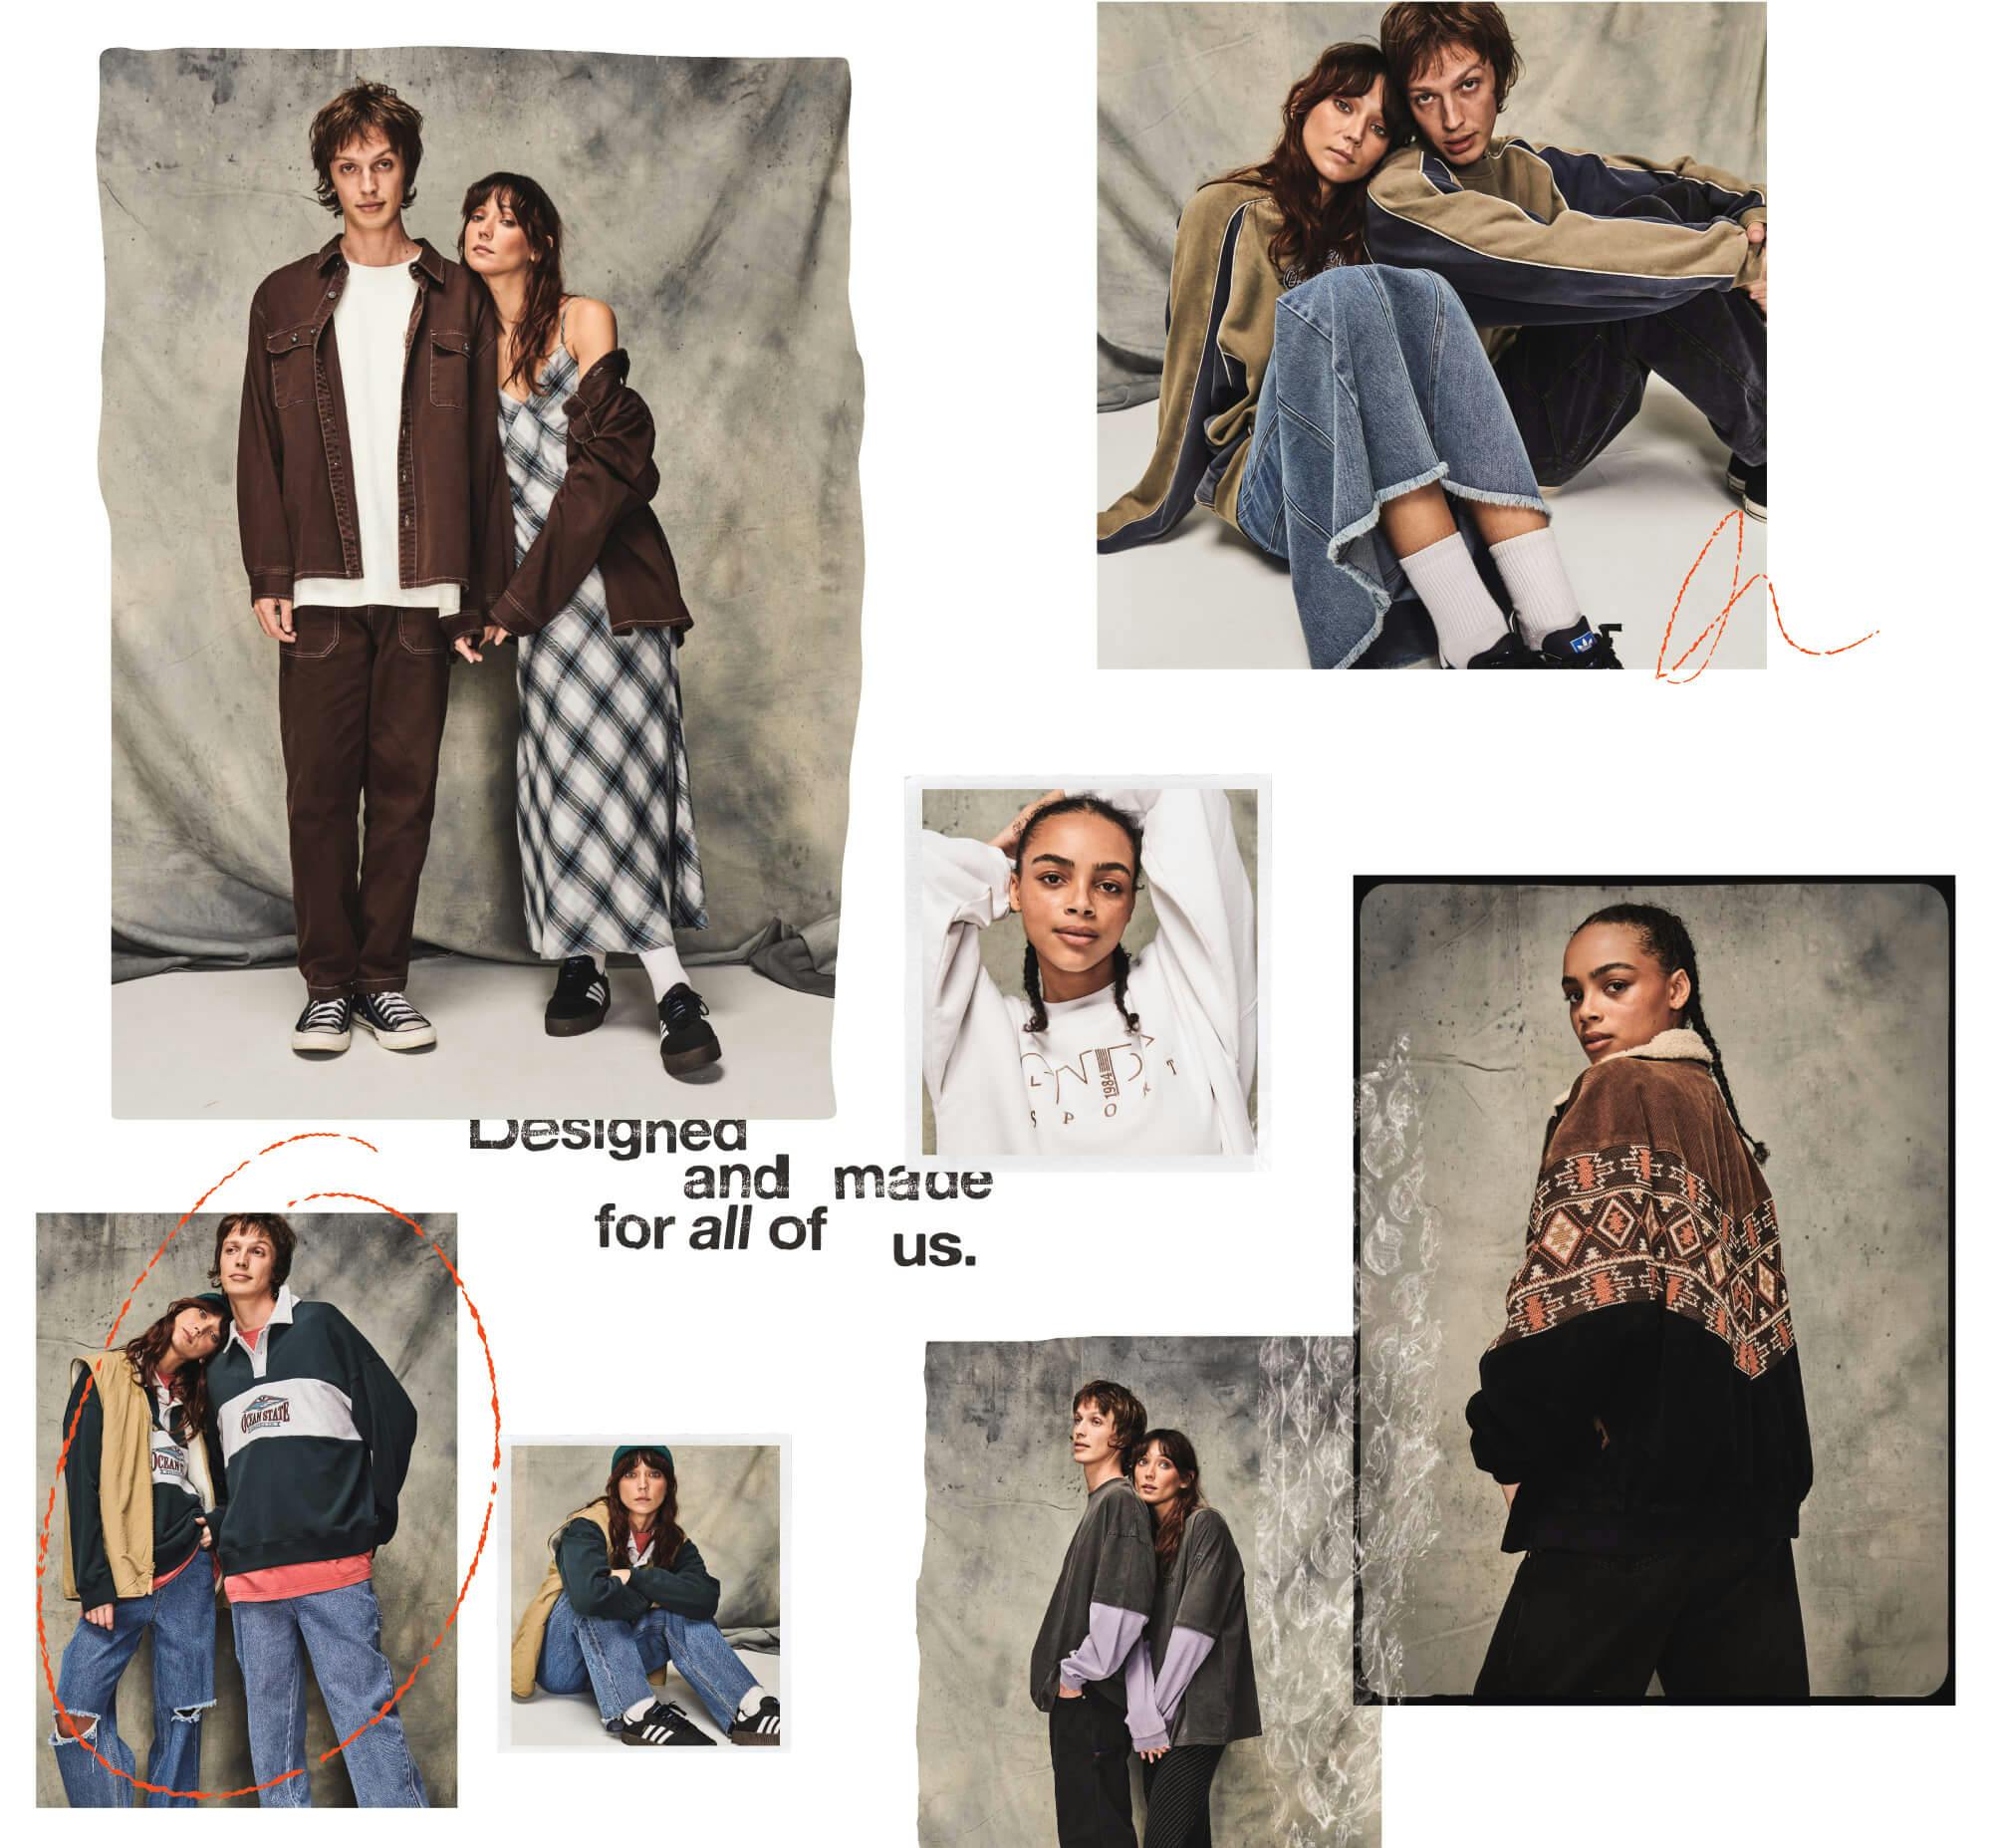 Collage layout of different images all taken on a light denim background. Main image (top left) features a male and female model wearing the same brown jacket, the female wears a check maxi dress with it while he wears the matching brown pants. Top right image features two models wearing a vintage panel crew, the female wears it with a denim skirt and he is wearing black jeans. Centre image, small and in a white square frame, female model is wearing a white crew with GNDA embroidery. Bottom right image, female model faces away from camera showing the back detailing of an black and brown aztec inspired jacket. This image overlaps the edge of another image of a female and male model wearing a layered long sleeve, grey tee with purple sleeves. Bottom left image is female and male wearing a panelled rugby crew with denim jeans. Text underlapping the main image reads "designed and made for all of us"